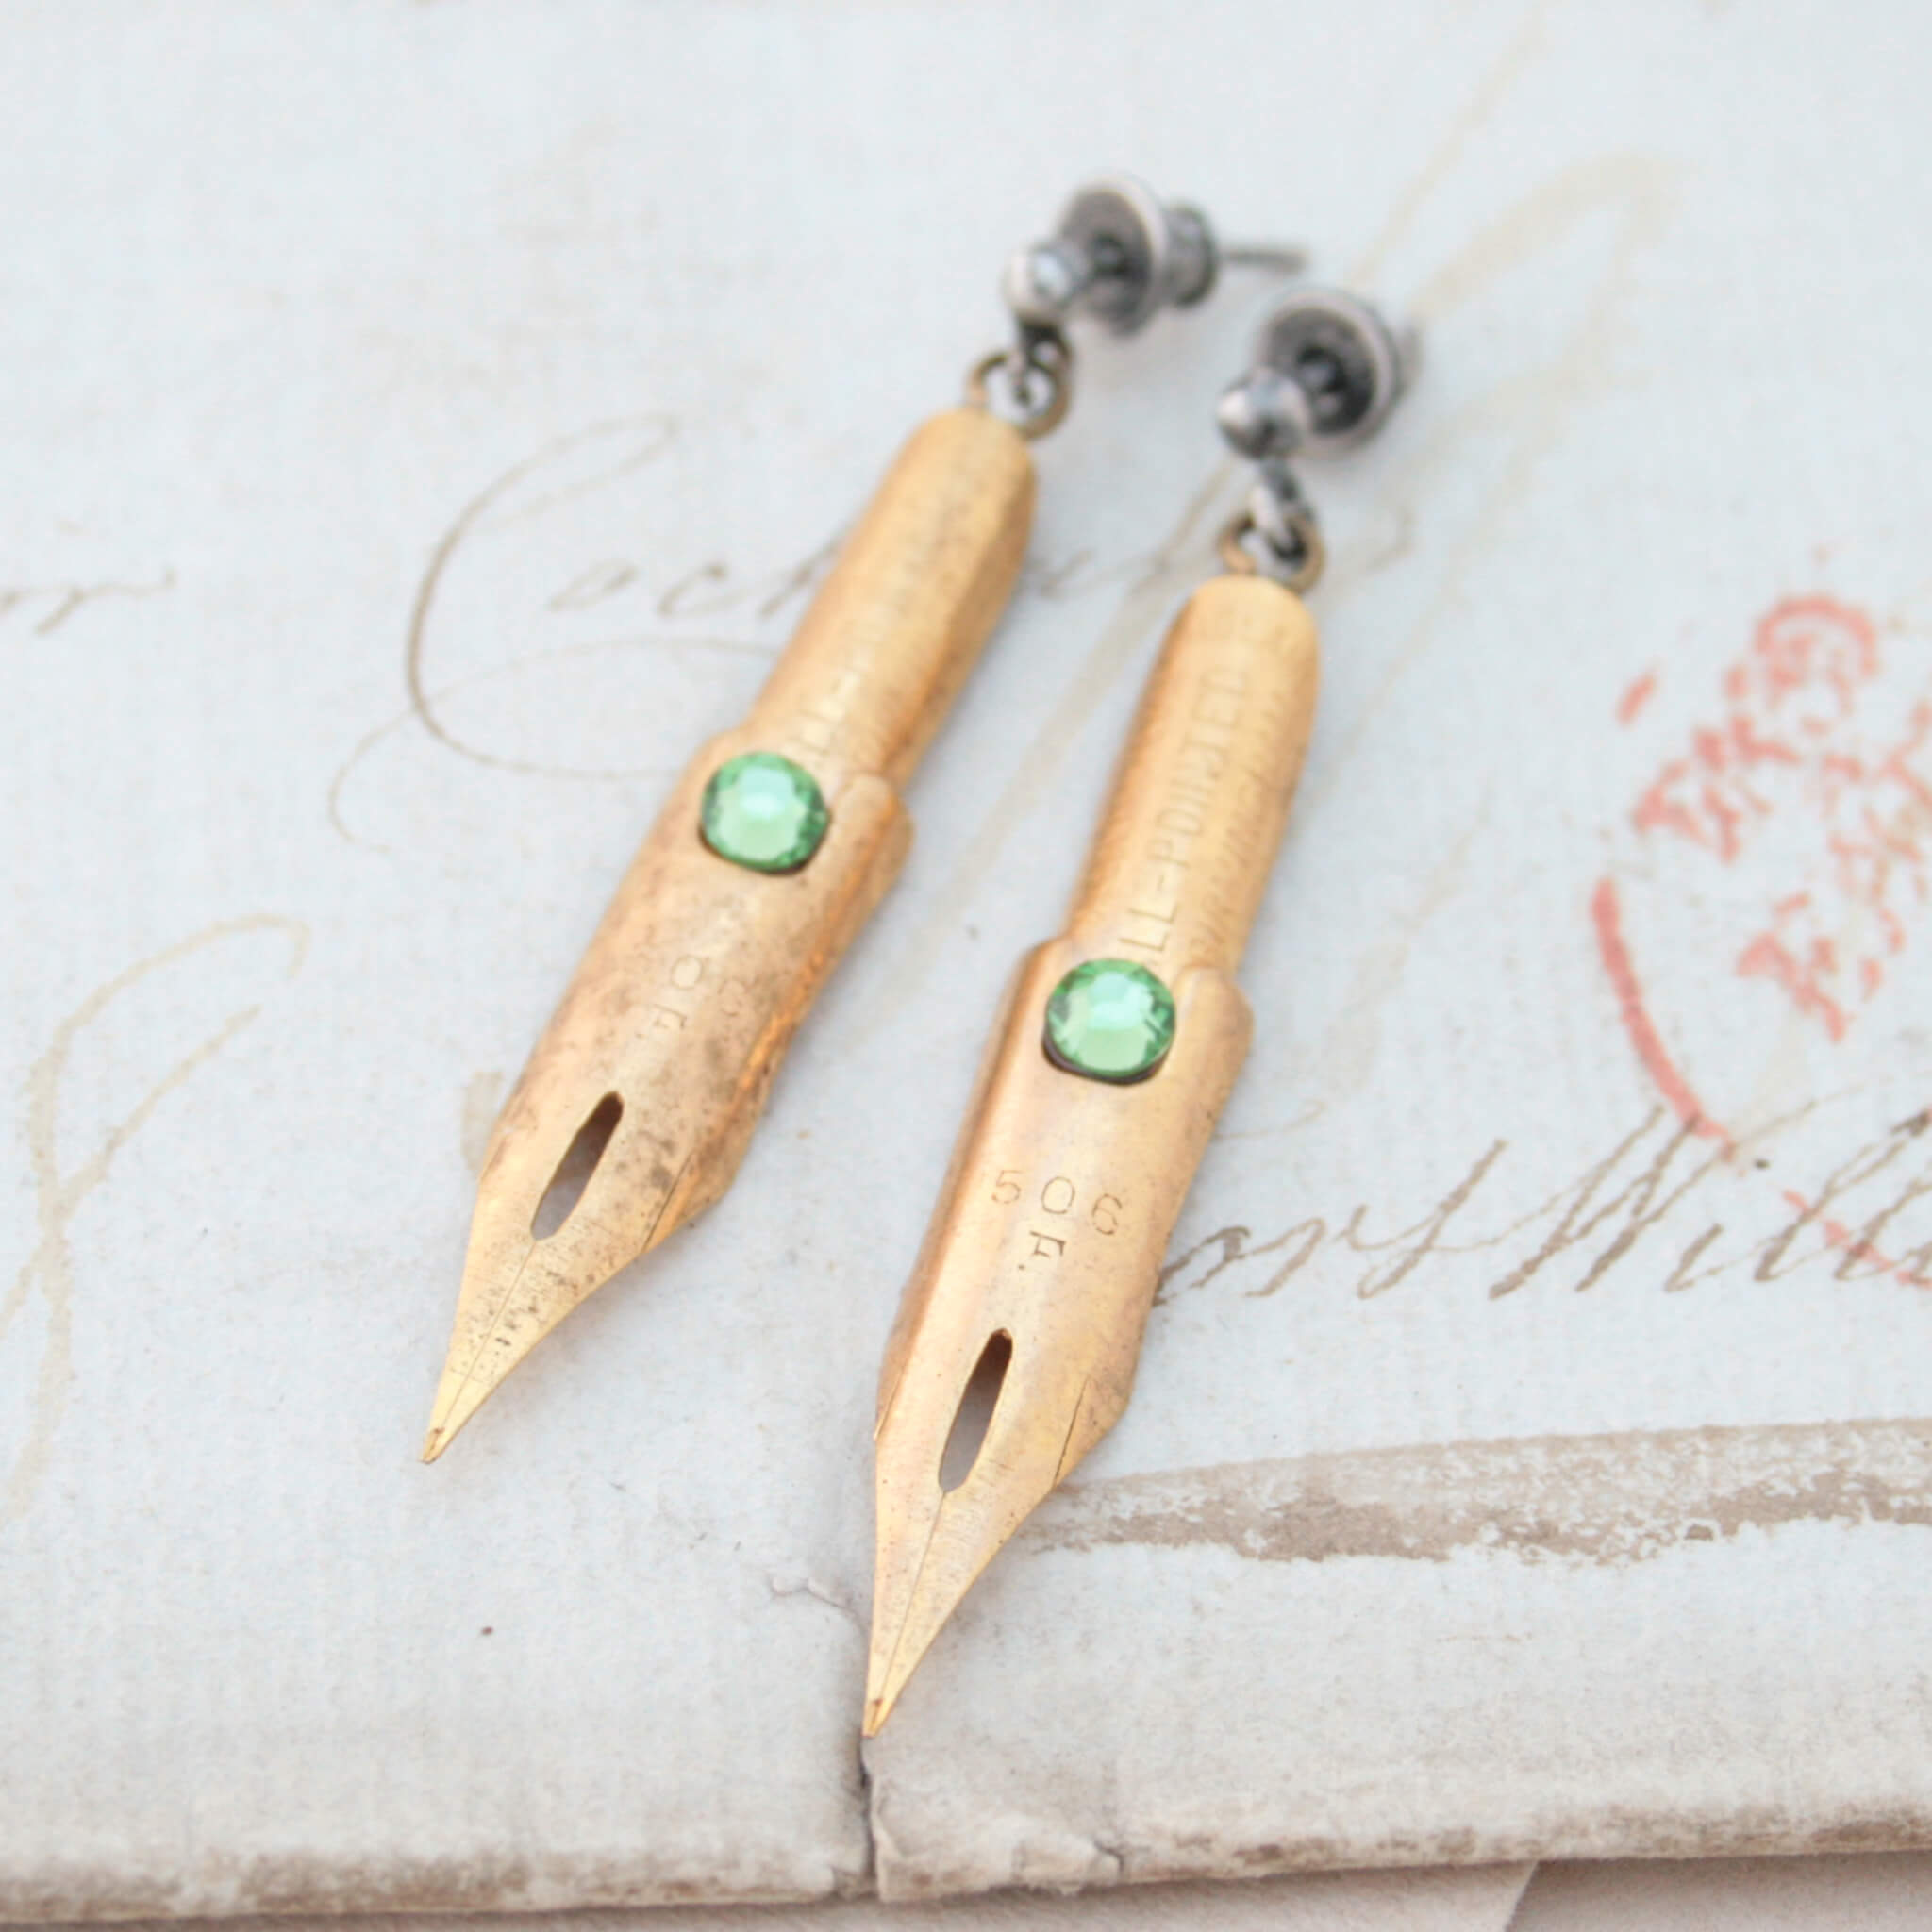 dark academia earrings made of gold coated pen nibs with peridot crystals lying on an old letter